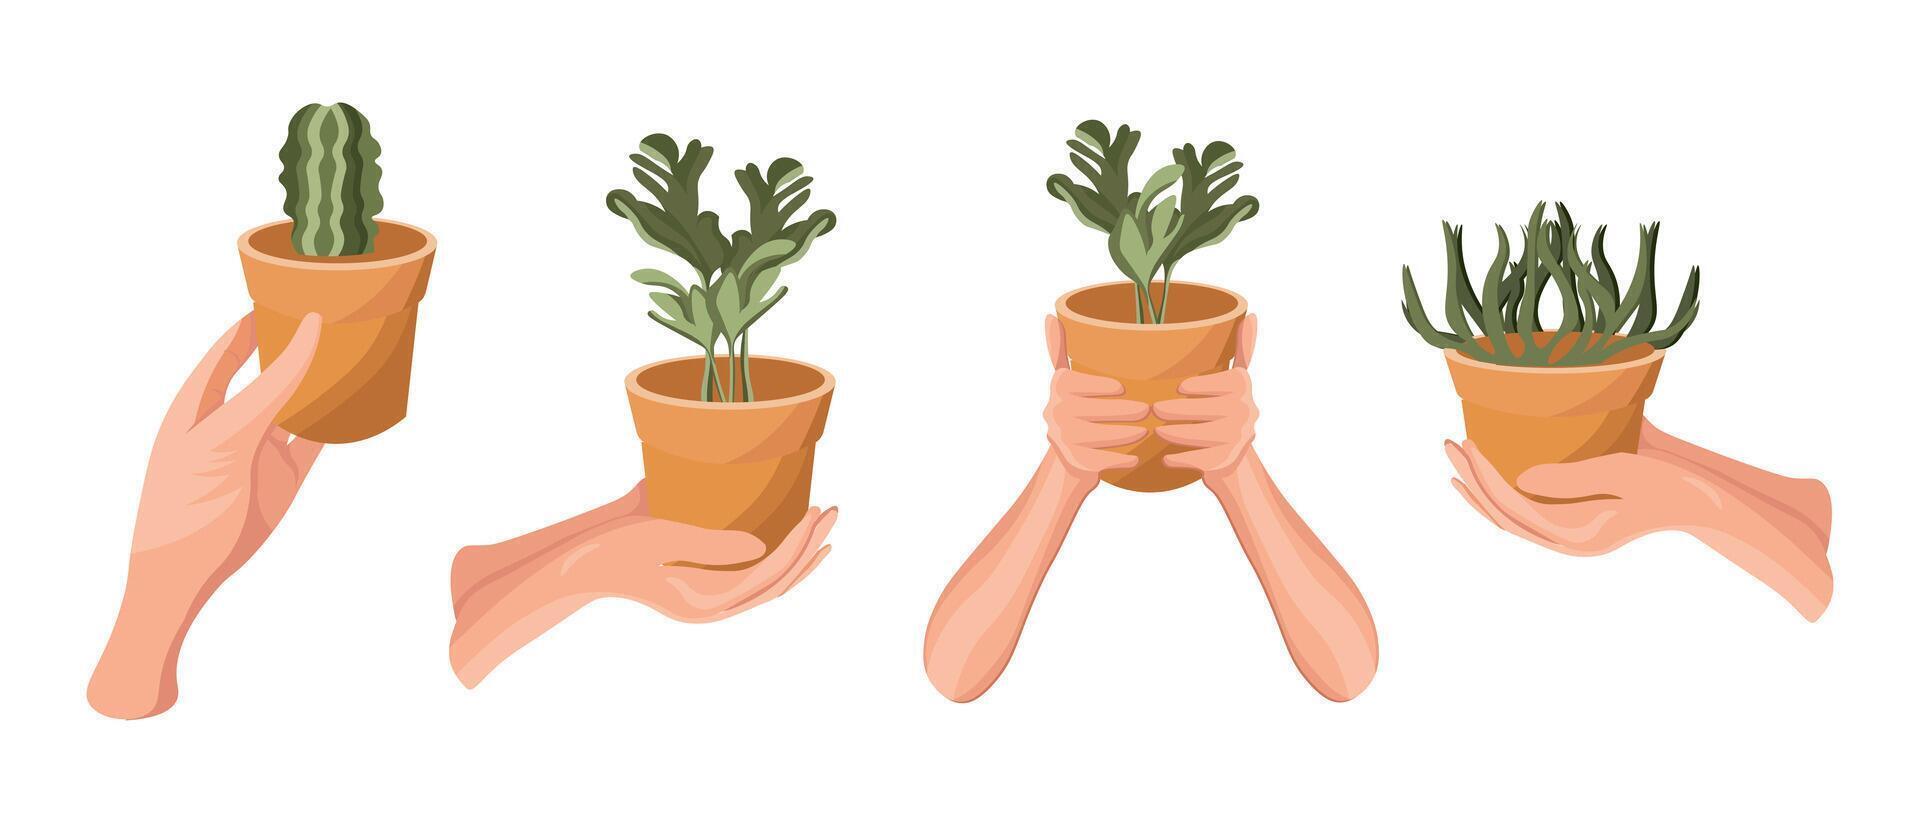 Hands with potted home plants, icons set. Plant care. Illustration, vector